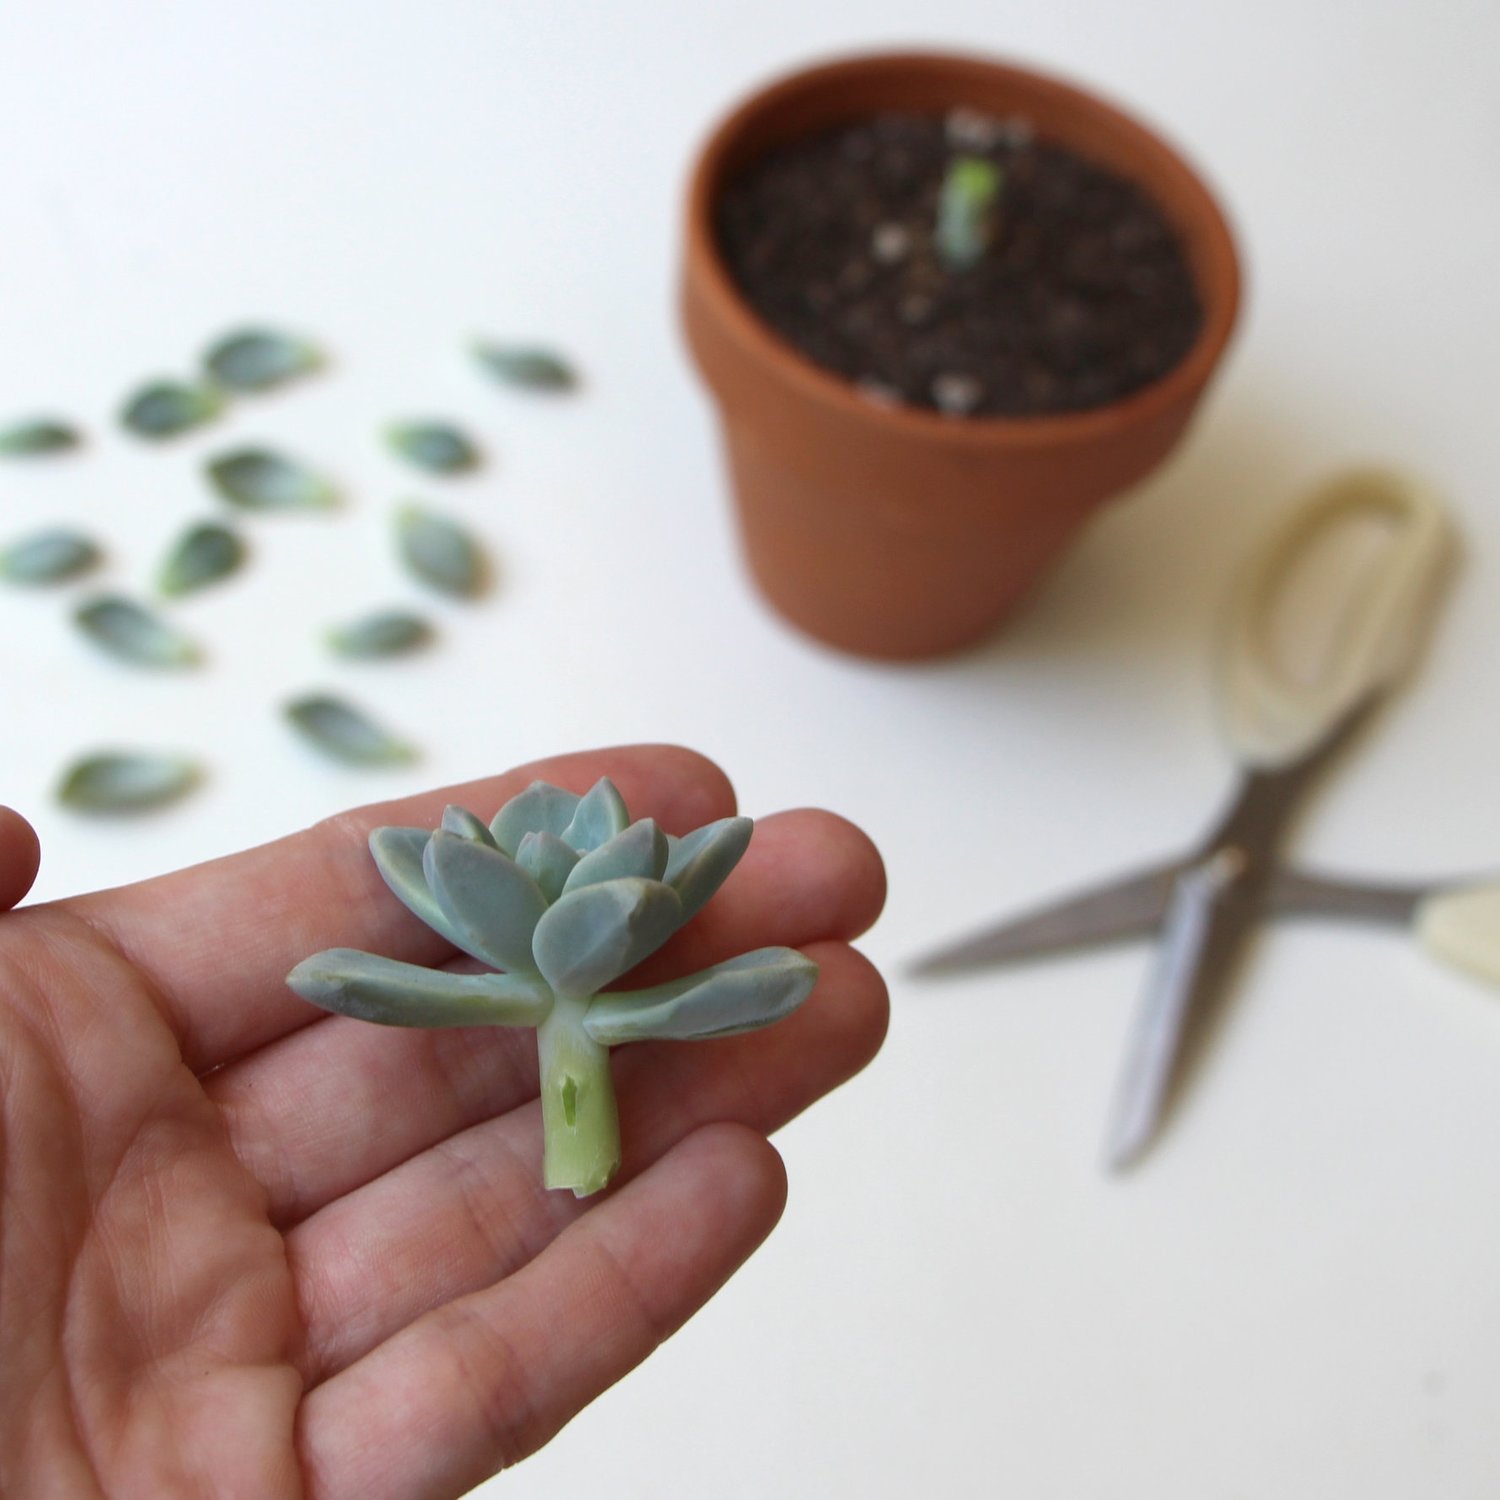 Before and after image of a cut succulent stem showing new growth